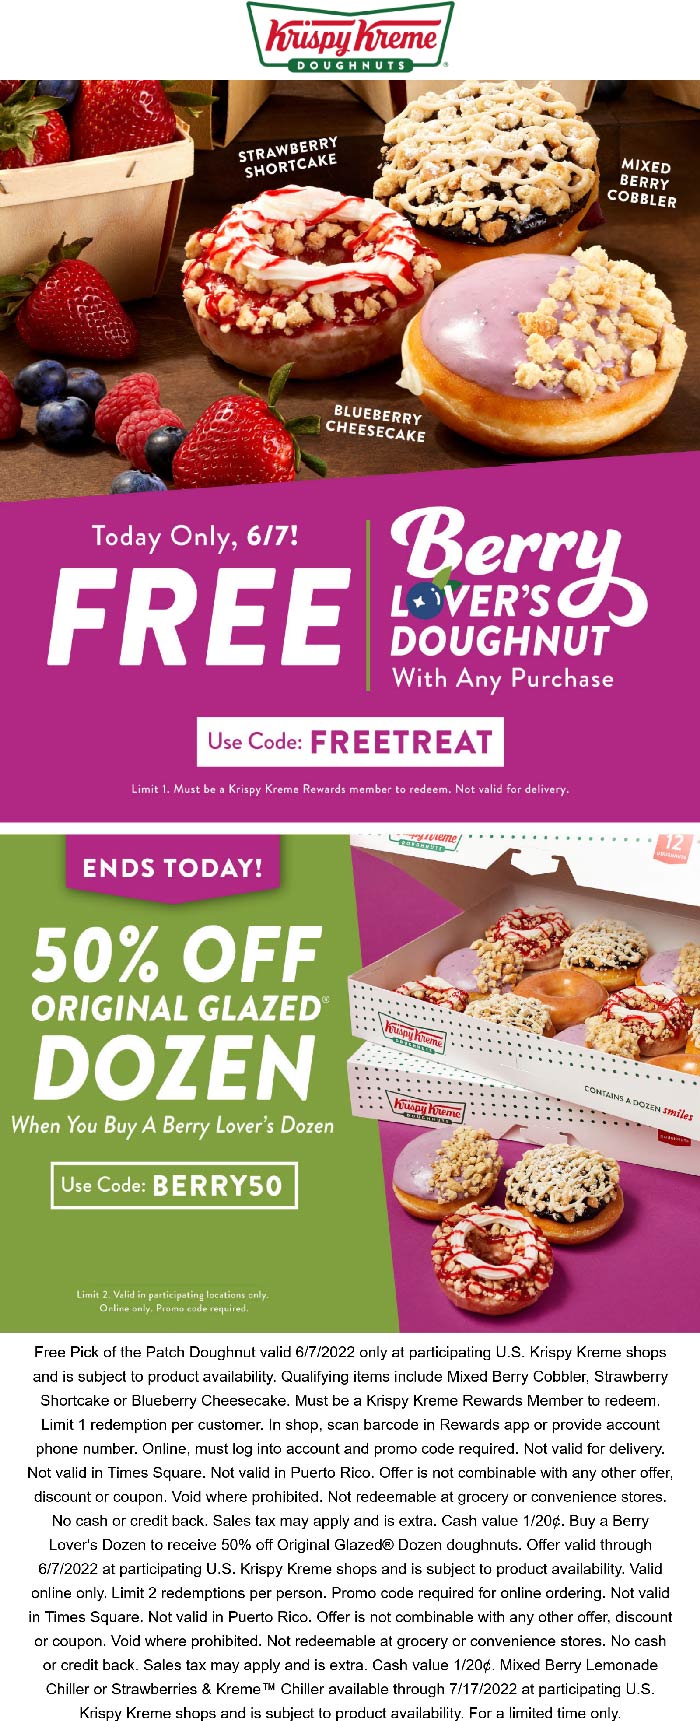 Krispy Kreme restaurants Coupon  Free berry doughnut with any order + 50% off second dozen today at Krispy Kreme via promo code FREETREAT #krispykreme 